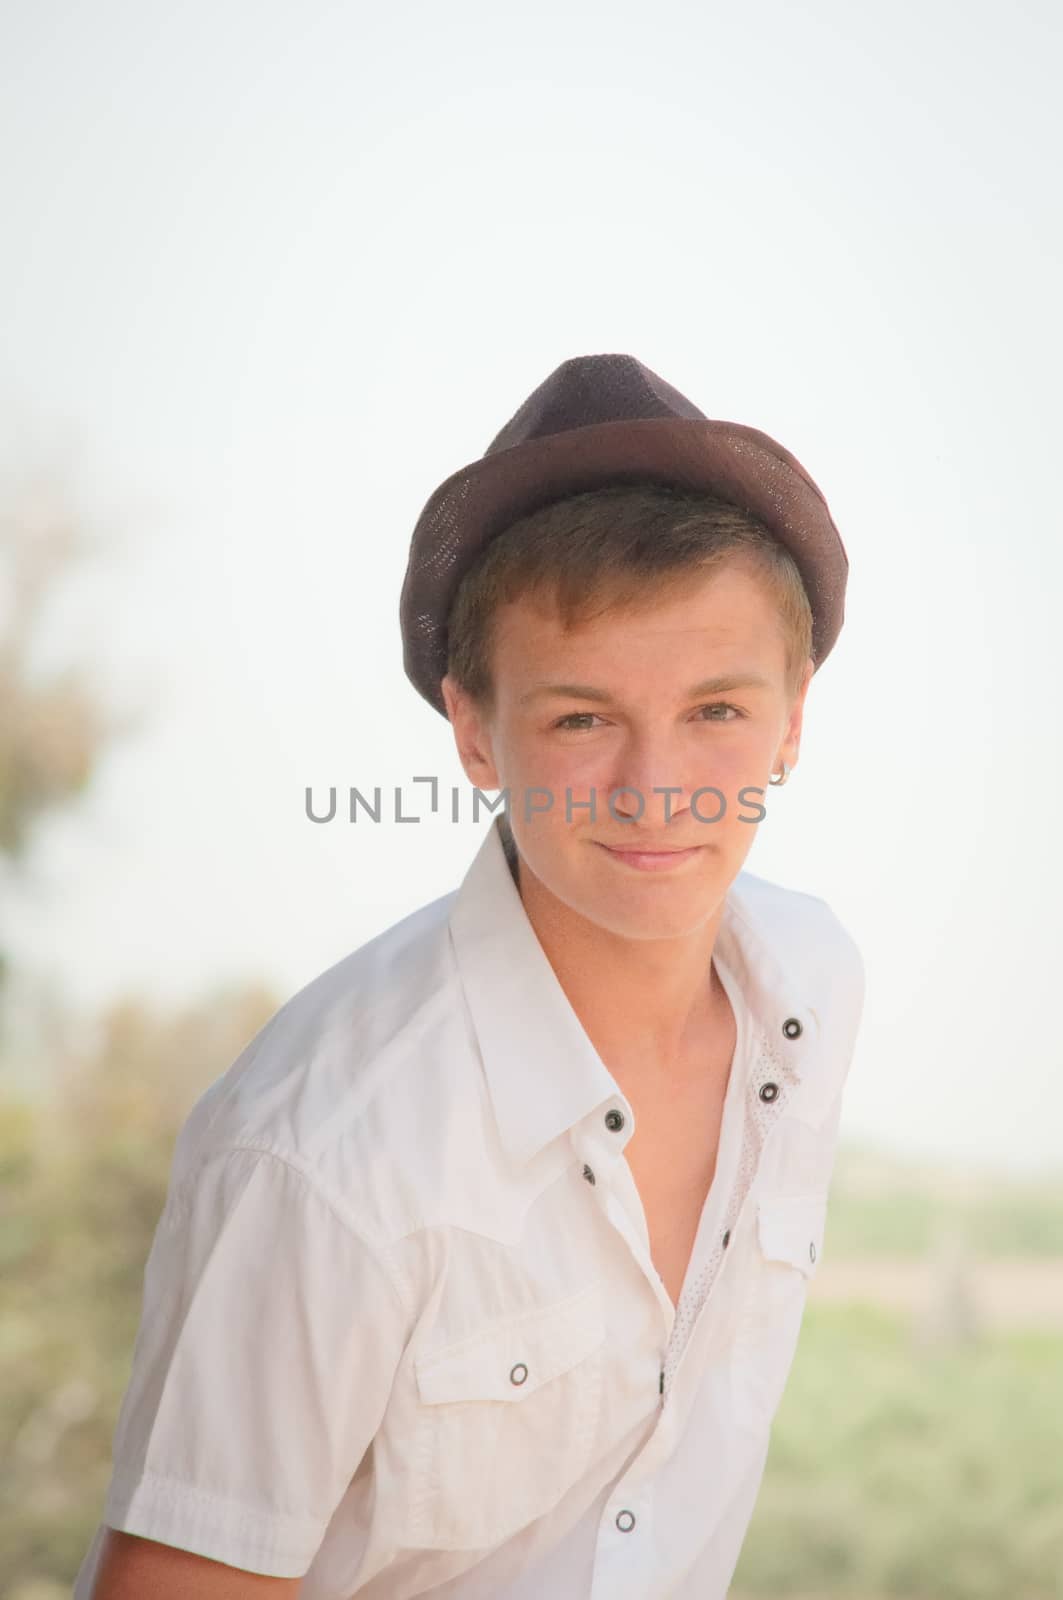 Portrait of a teenager in a white shirt and a brown hat.